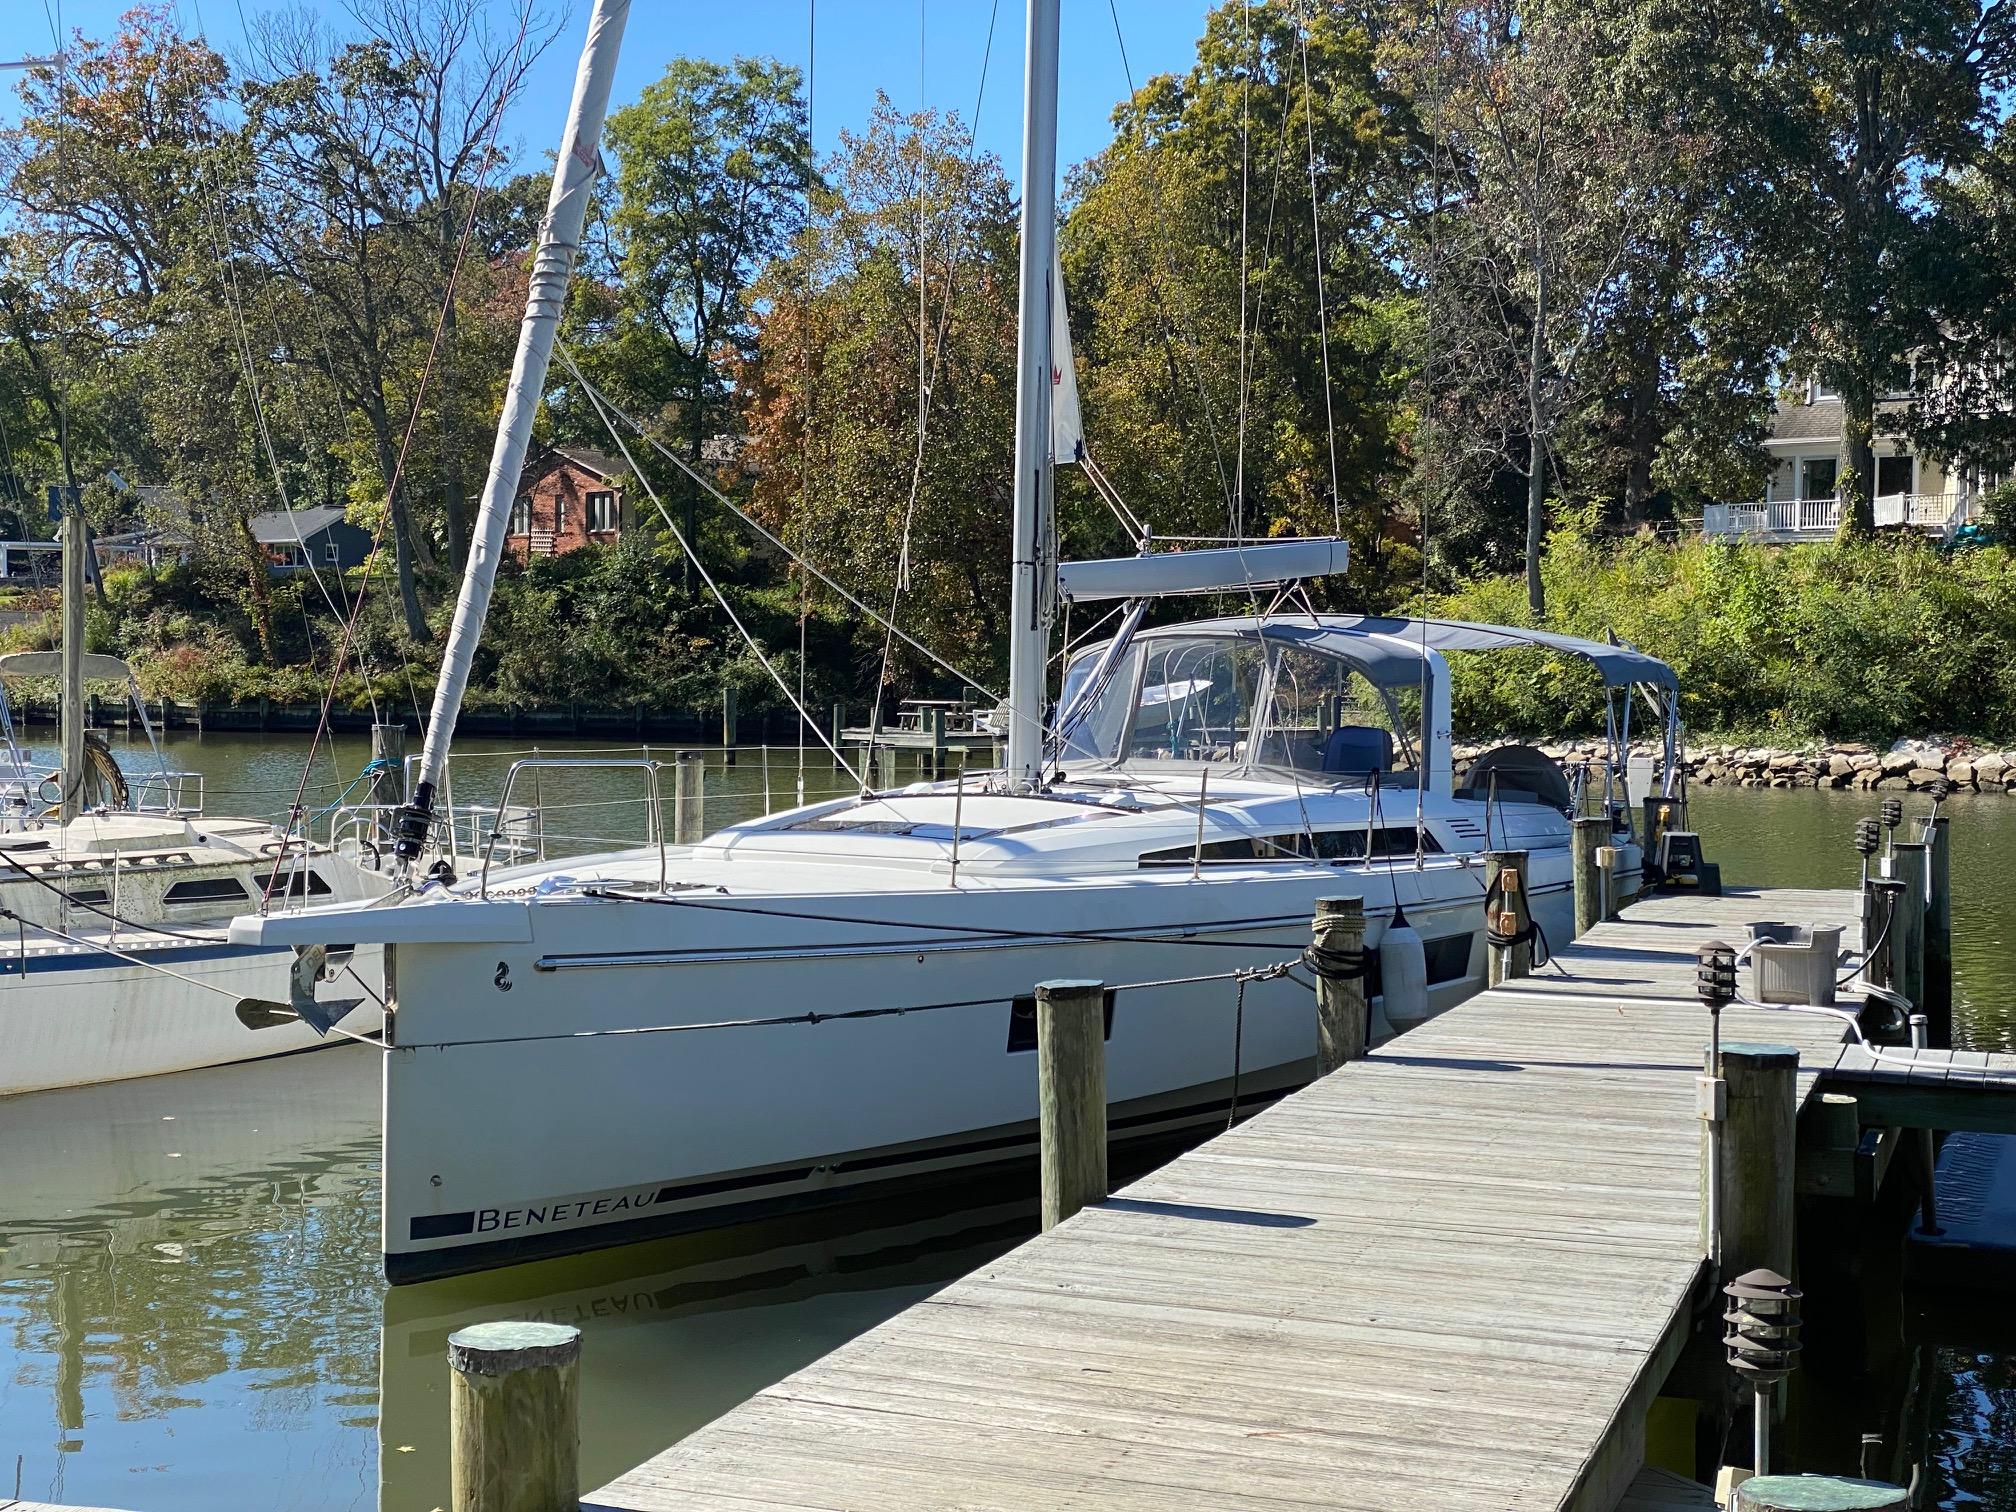 Kimberly Ann Yacht Brokers of Annapolis